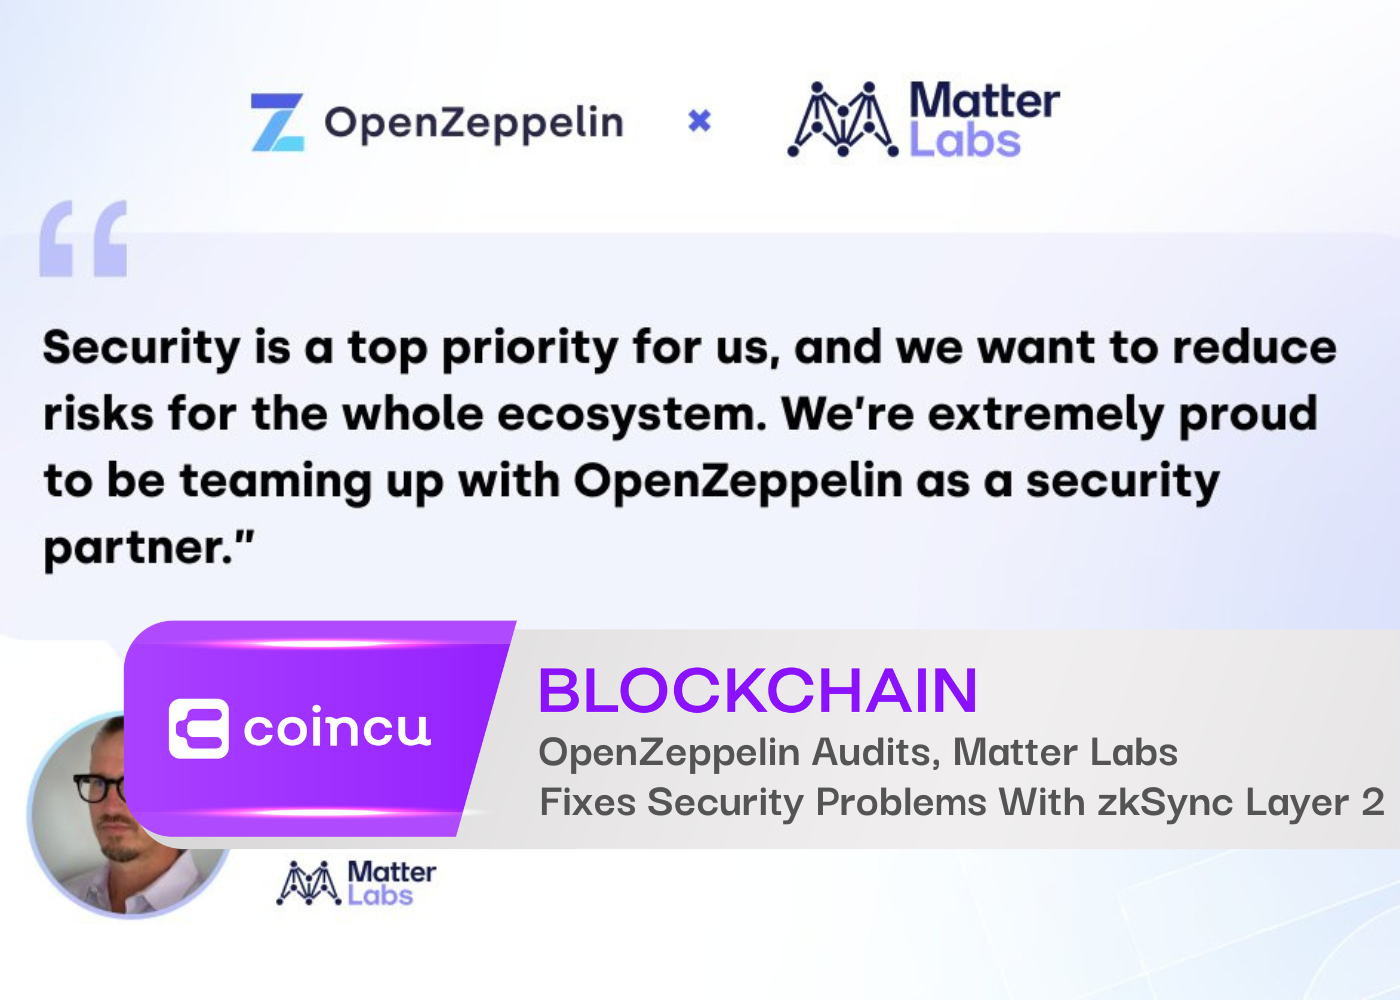 OpenZeppelin Audits Matter Labs Fixes Security Problems